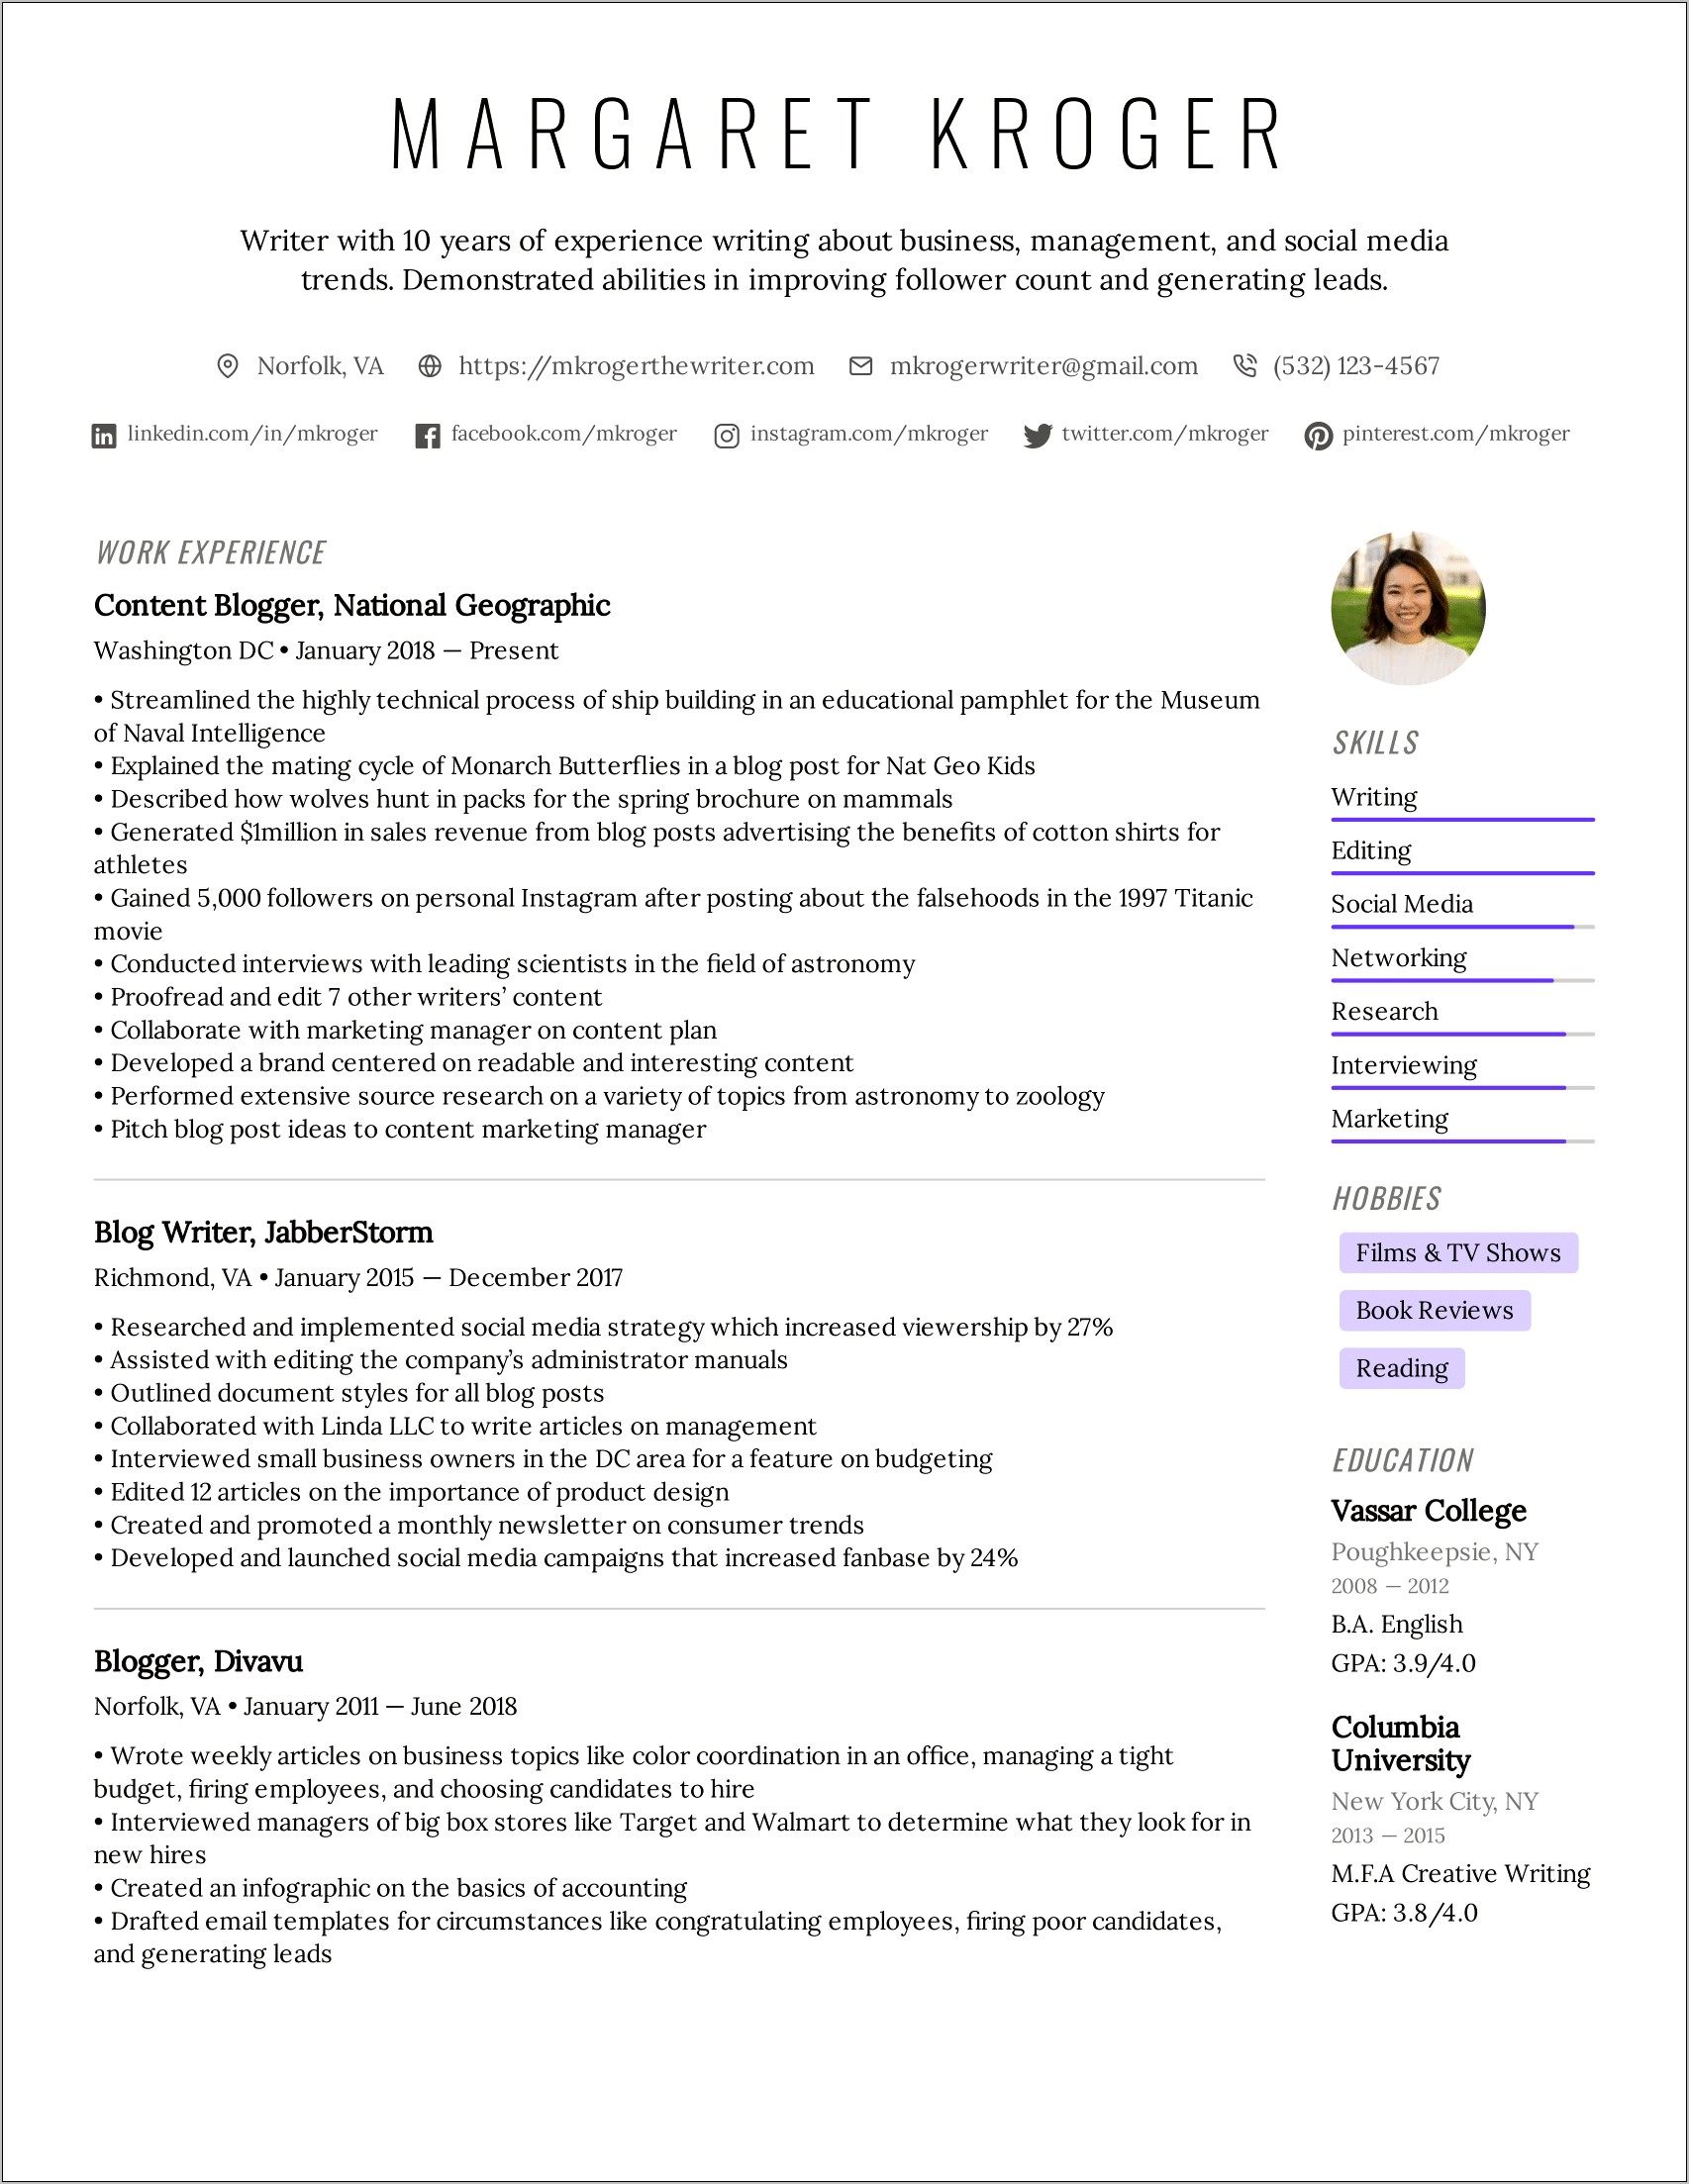 Professional Writer Resume Template Example 2018